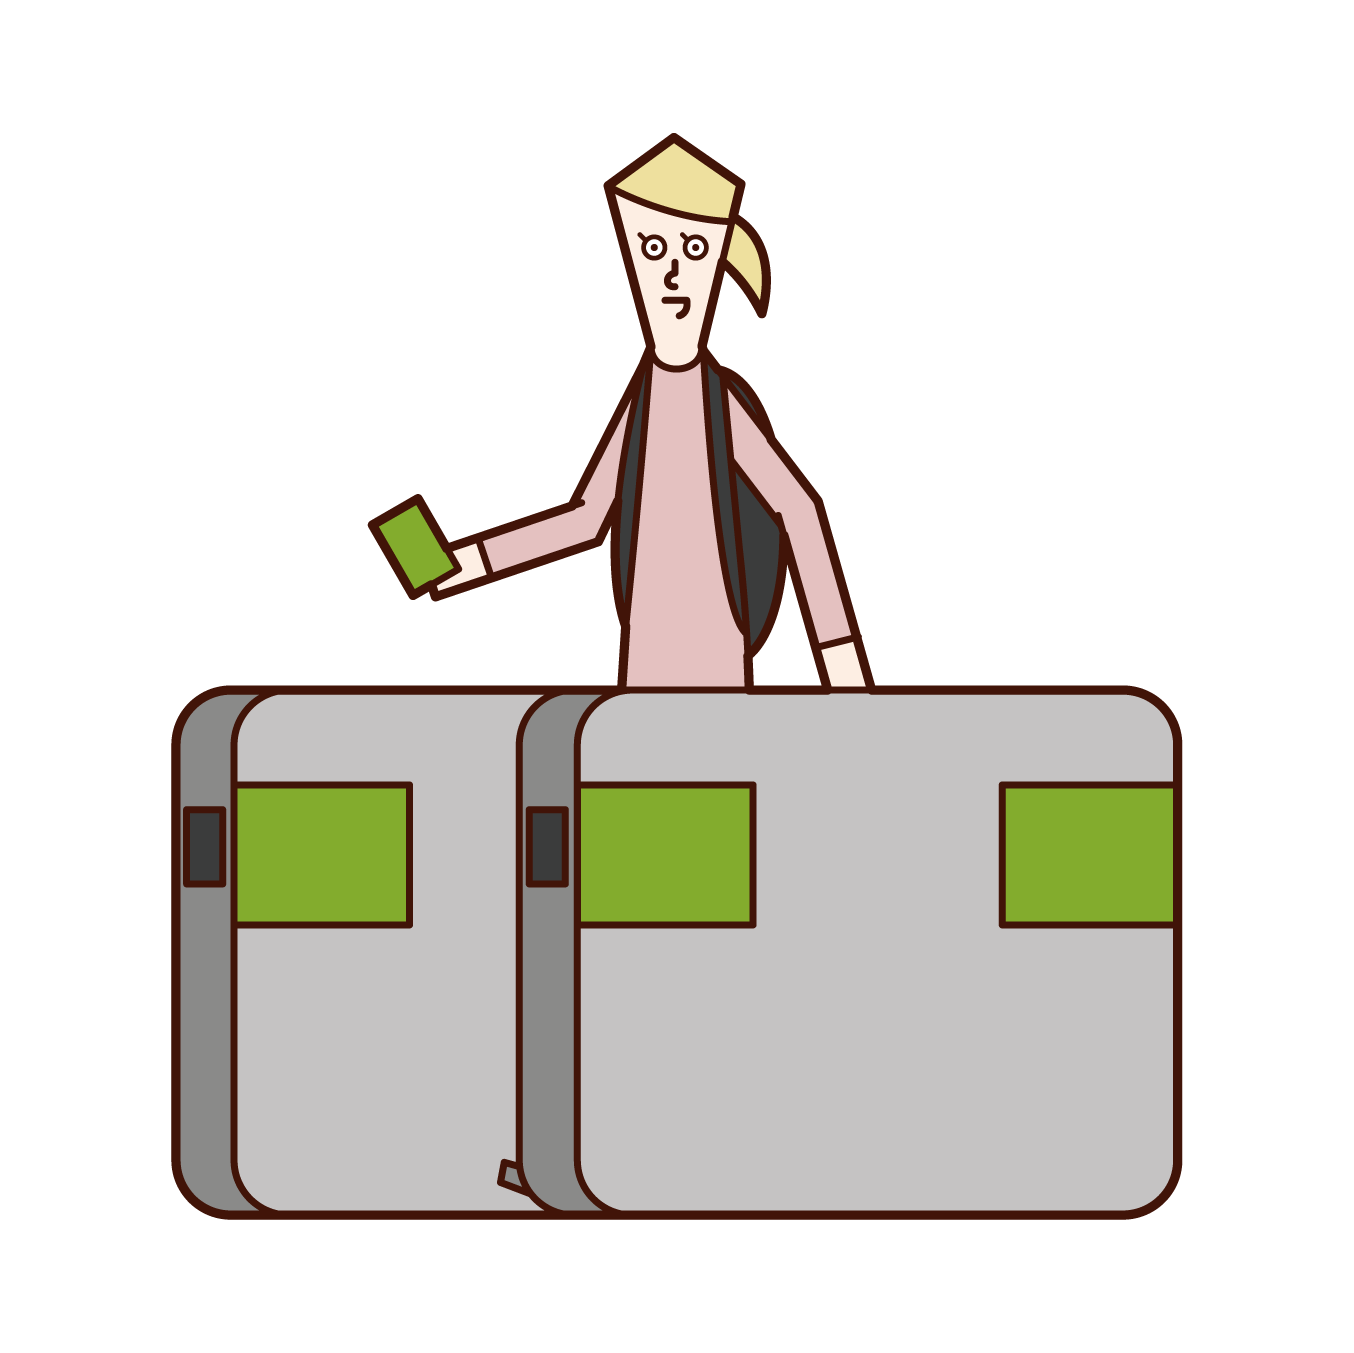 Illustration of a woman passing through the ticket gate of a station